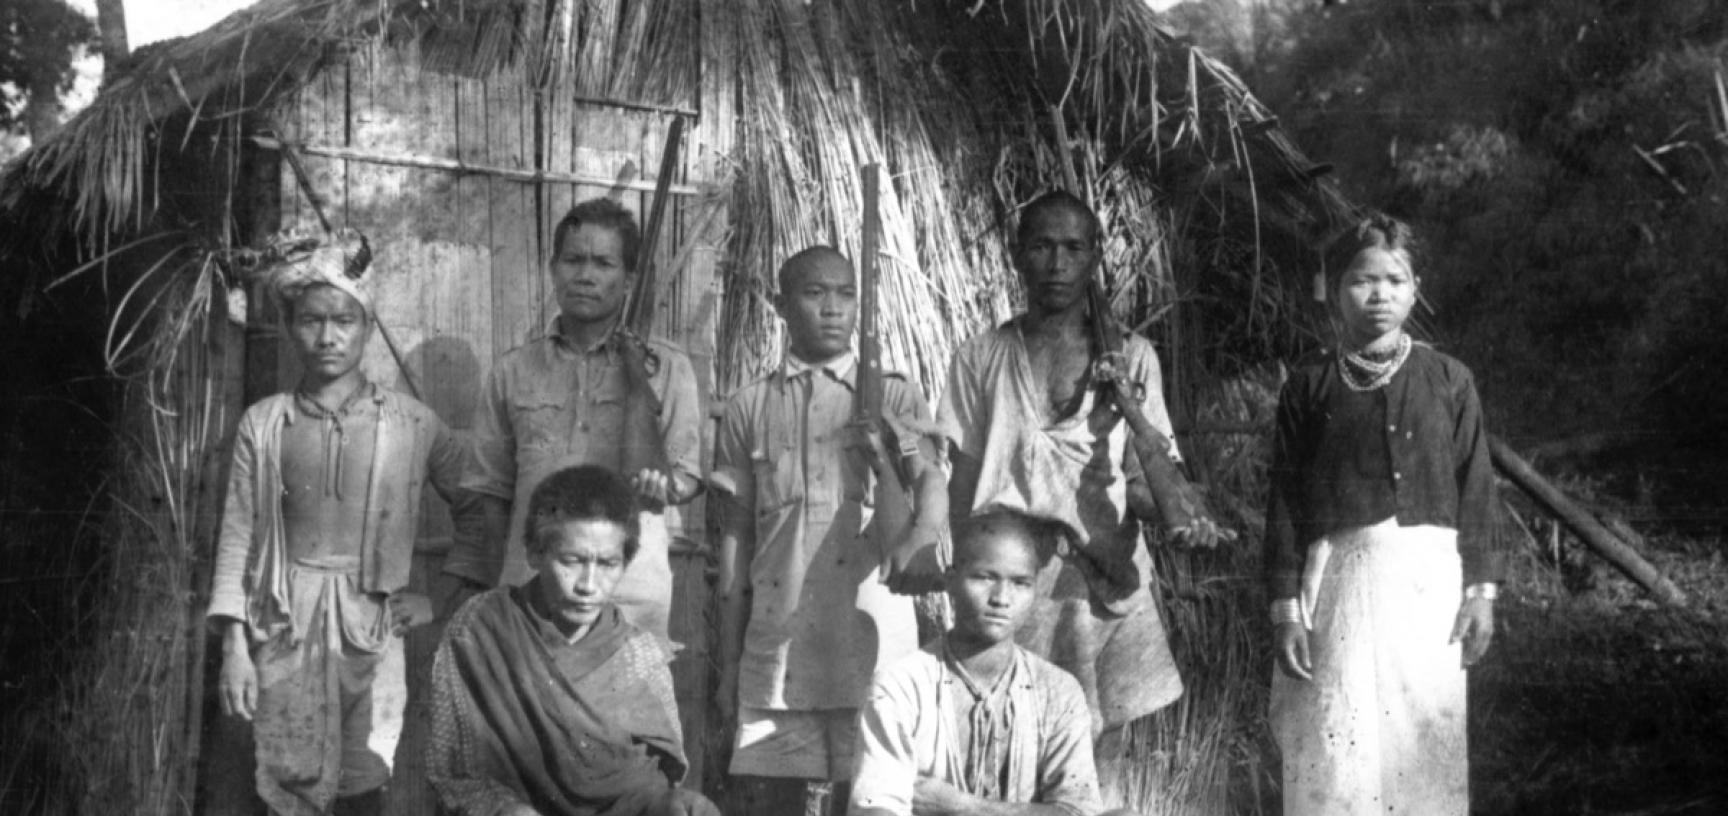 Group portrait of six men and one women, three of the men are holding guns